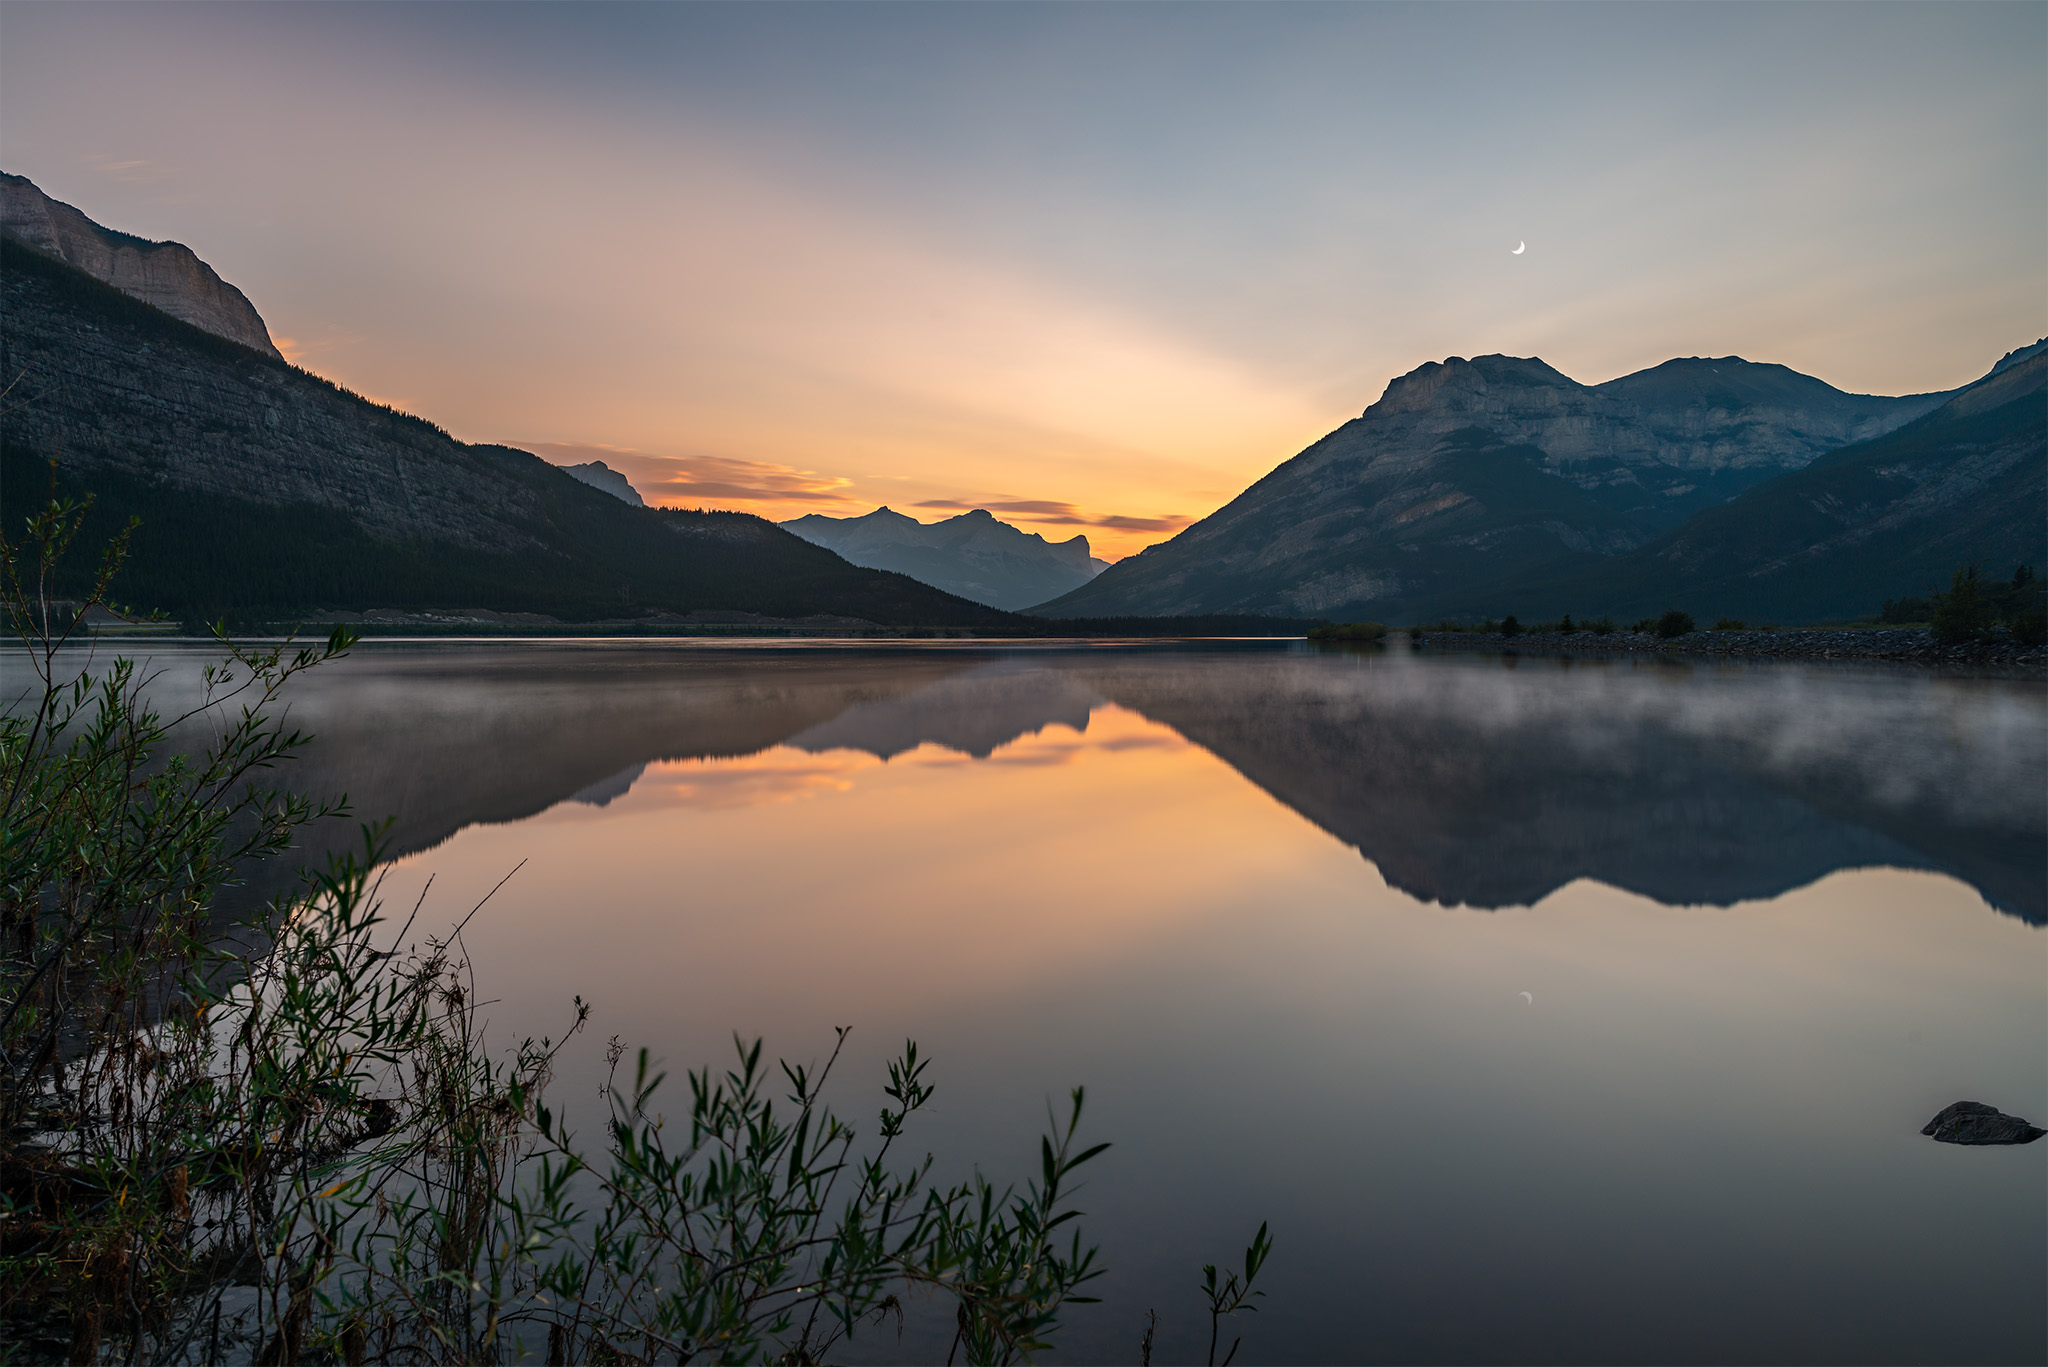 Sunset at lac Des arcs Alberta. A perfect reflection of the mountain range on a calm lake